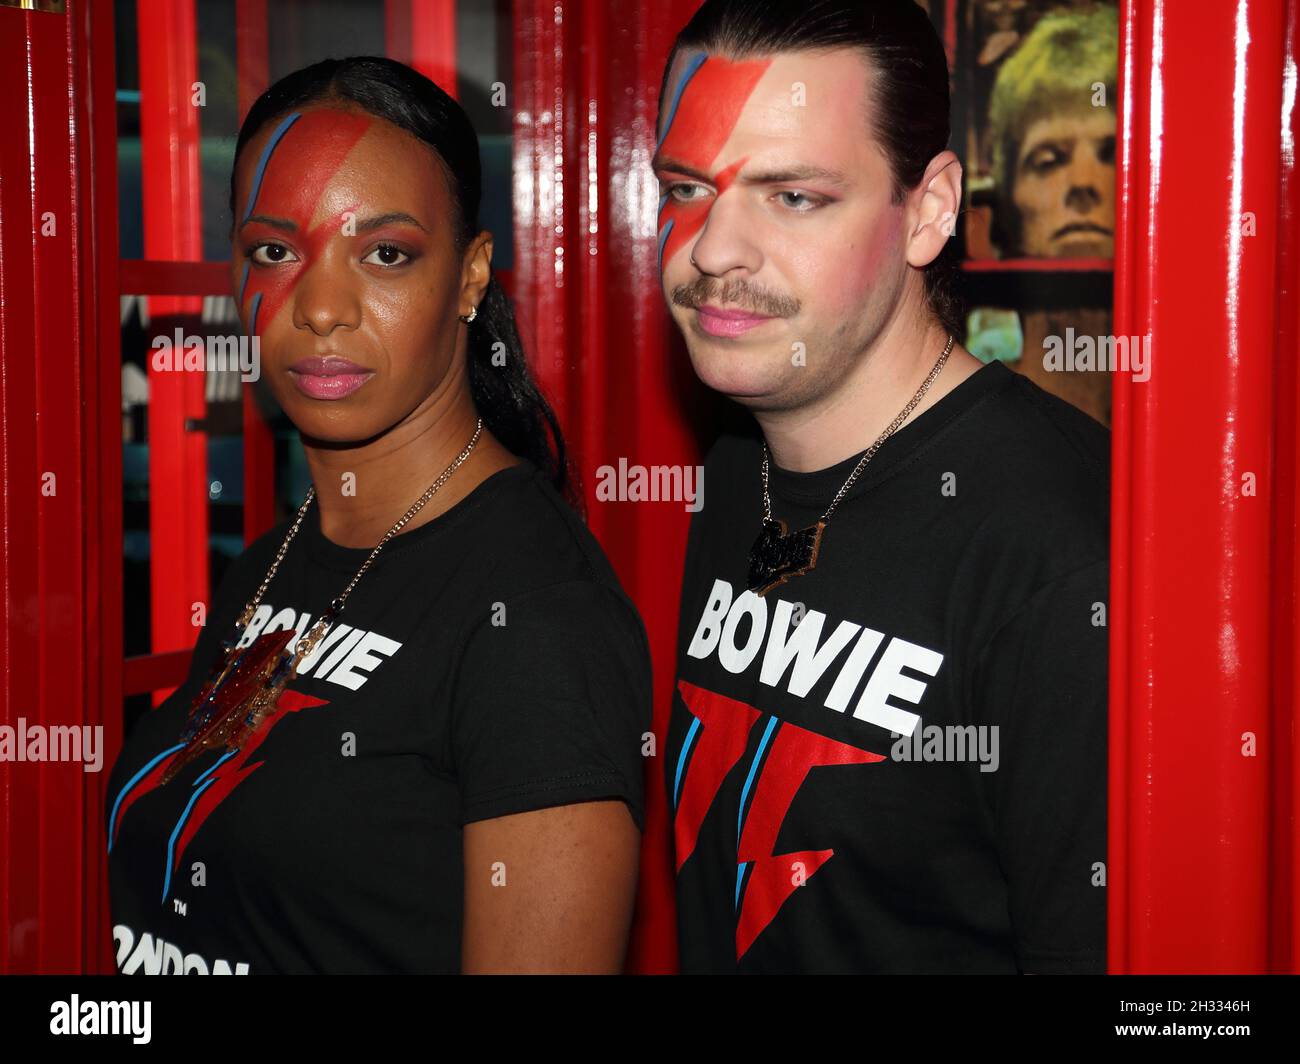 London, UK. 25th Oct, 2021. London, UK, October 25th. A pop up store is opening in Heddon Street to mark what would have been his 75th birthday offering David Bowie items. Two members of staff with Ziggy Stardust makeup pose in the iconic phone booth. Credit: Uwe Deffner/Alamy Live News Stock Photo